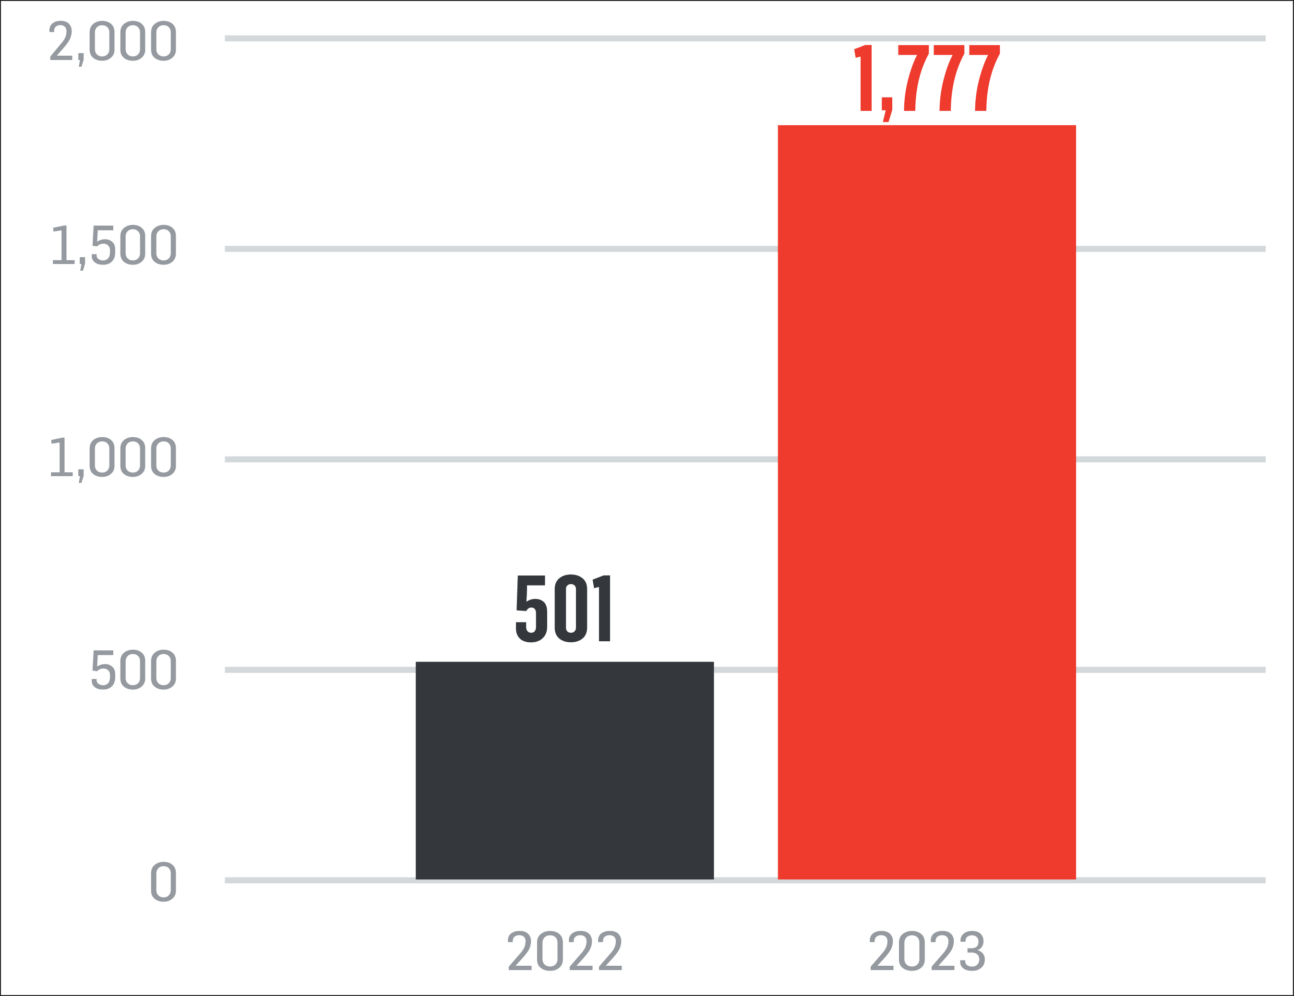 Bar chart showing increase in purchases from 501 in 2022 to 1,777 in 2023